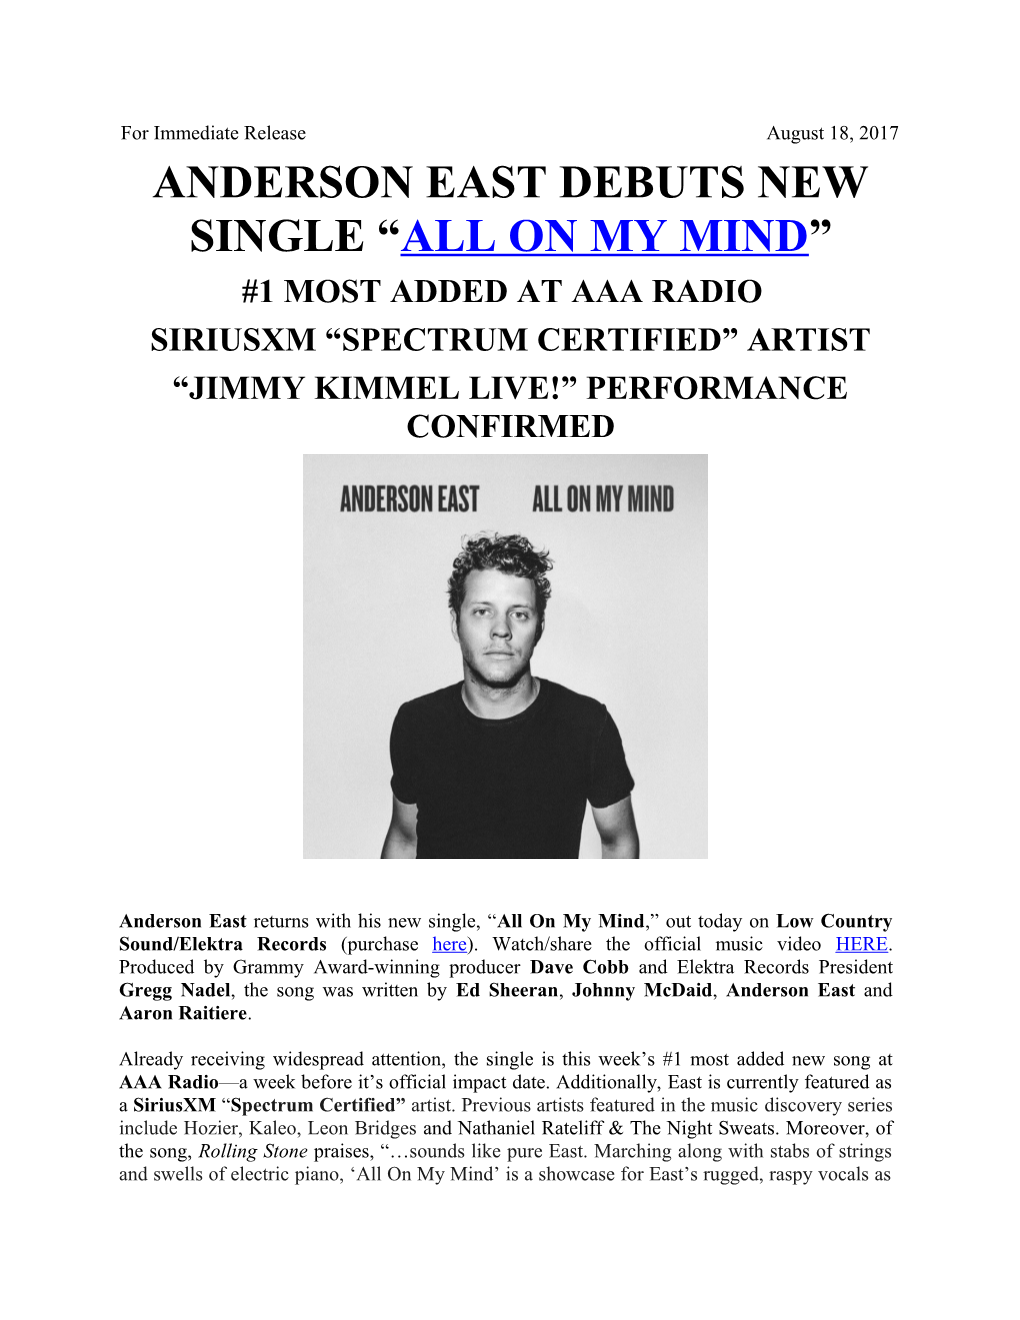 Anderson East Debuts New Single All on My Mind